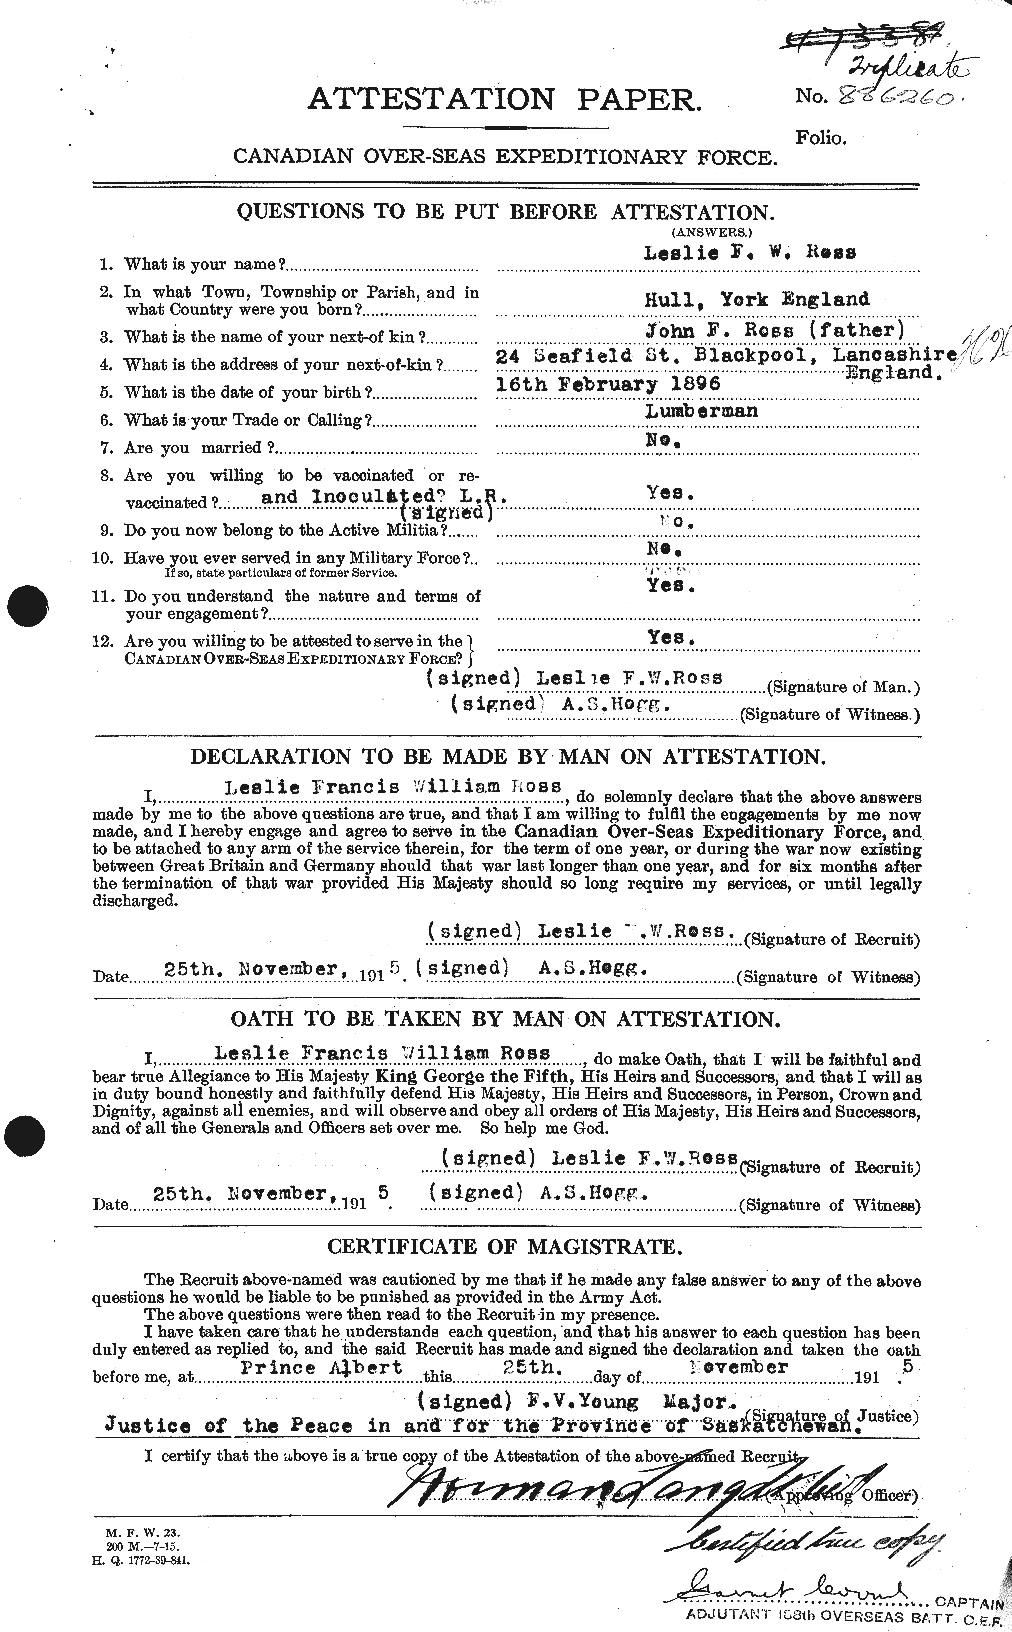 Personnel Records of the First World War - CEF 614991a